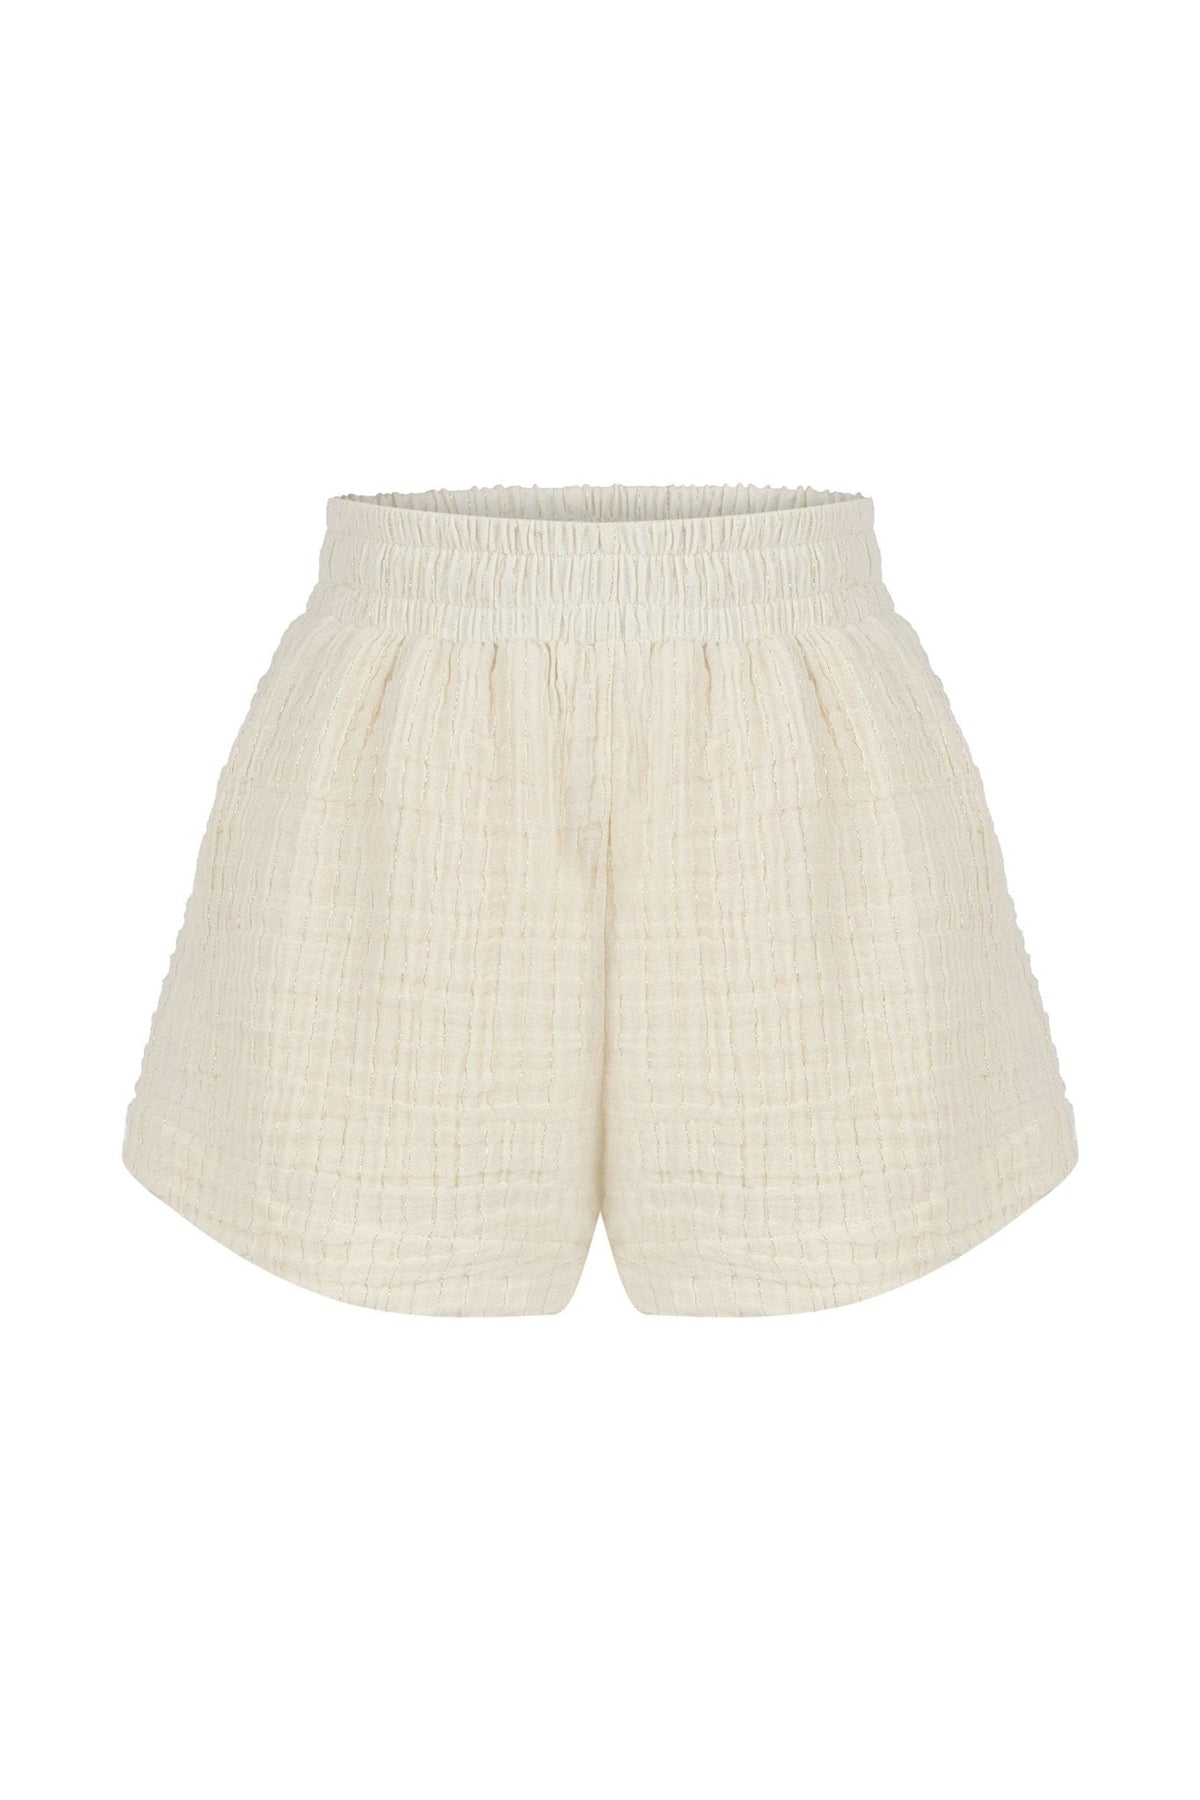 THE HAND LOOM Echo Womens Boy Shorts - Natural With Gold Stripes